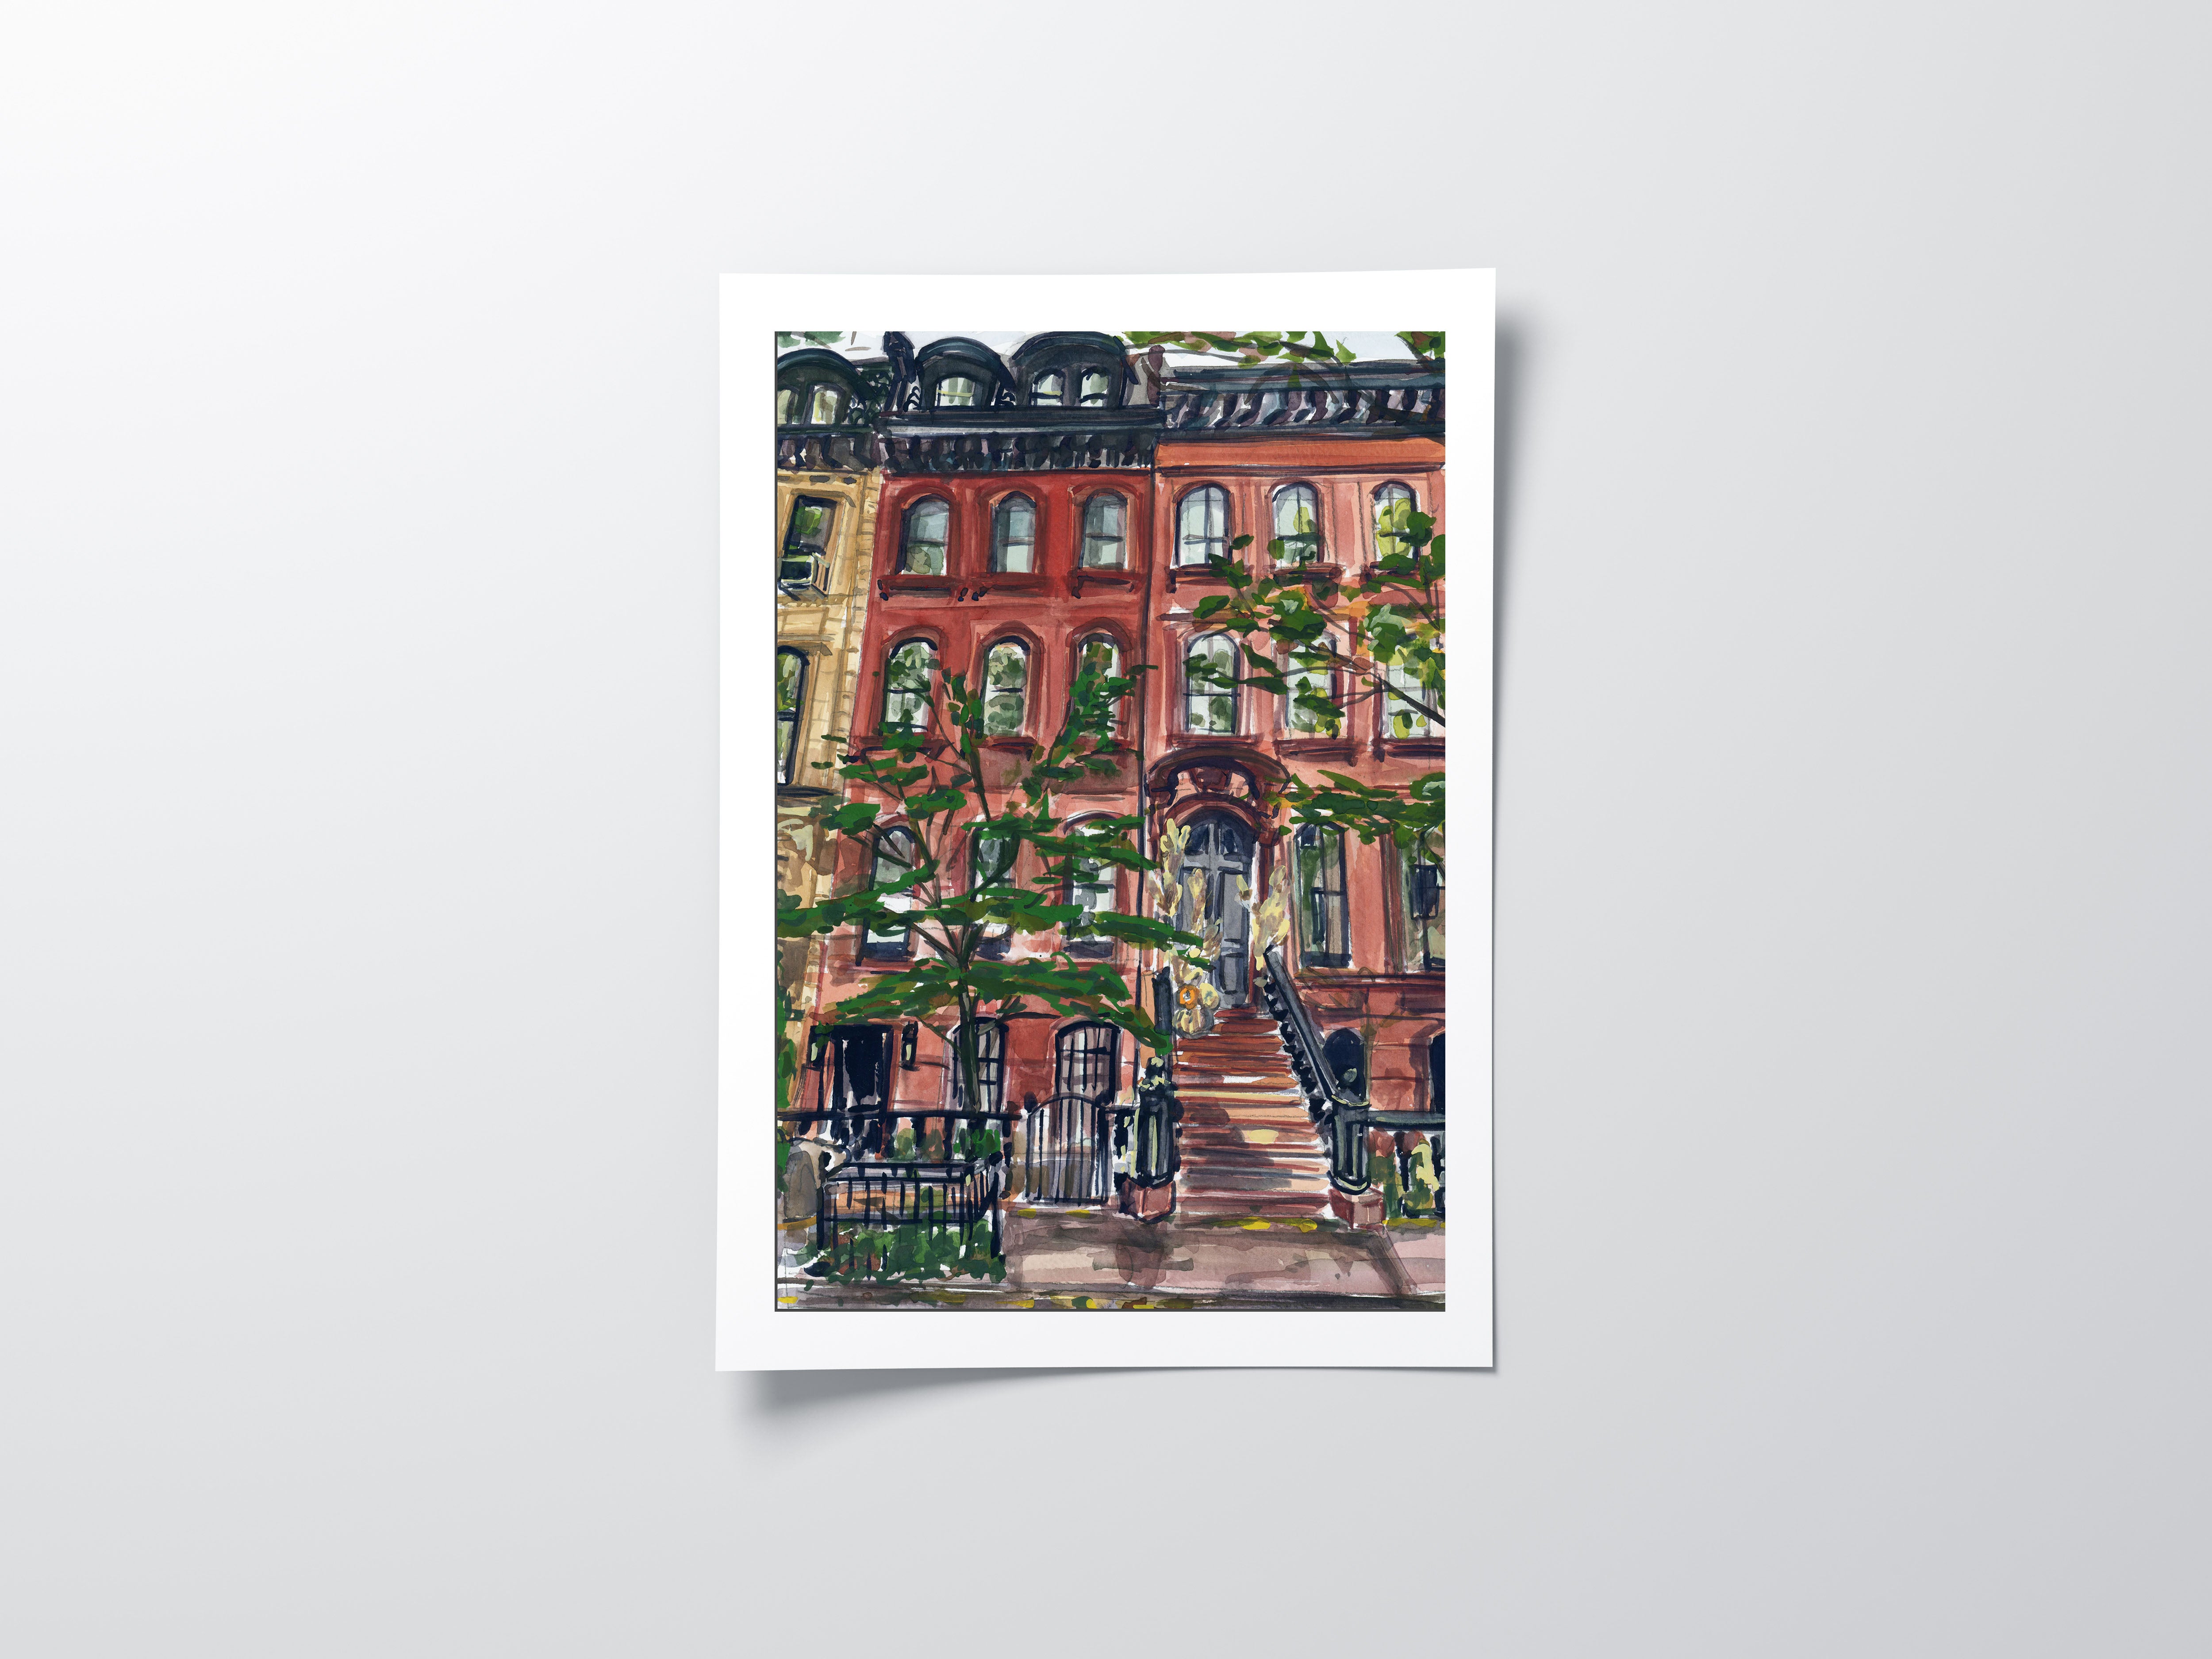 Dream Home - NYC print of painting by Medjool Studio. Print of original gouache painting captivating the timeless beauty of a classic NYC brownstone in the Upper East Side.